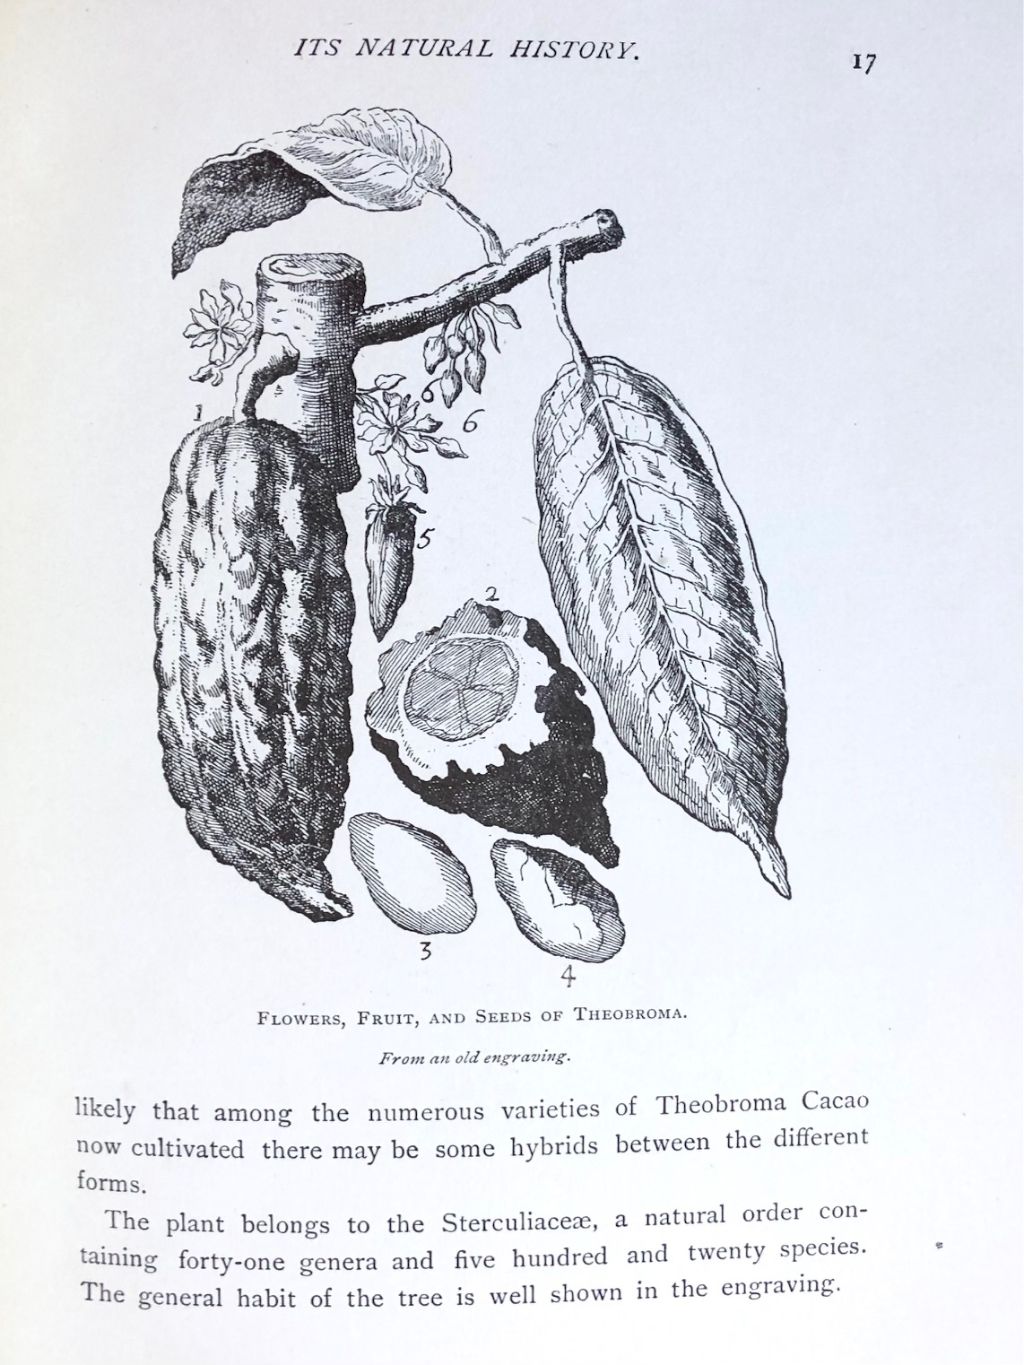 *NEW ARRIVAL* The Chocolate-Plant: Theobroma Cacao and its Products